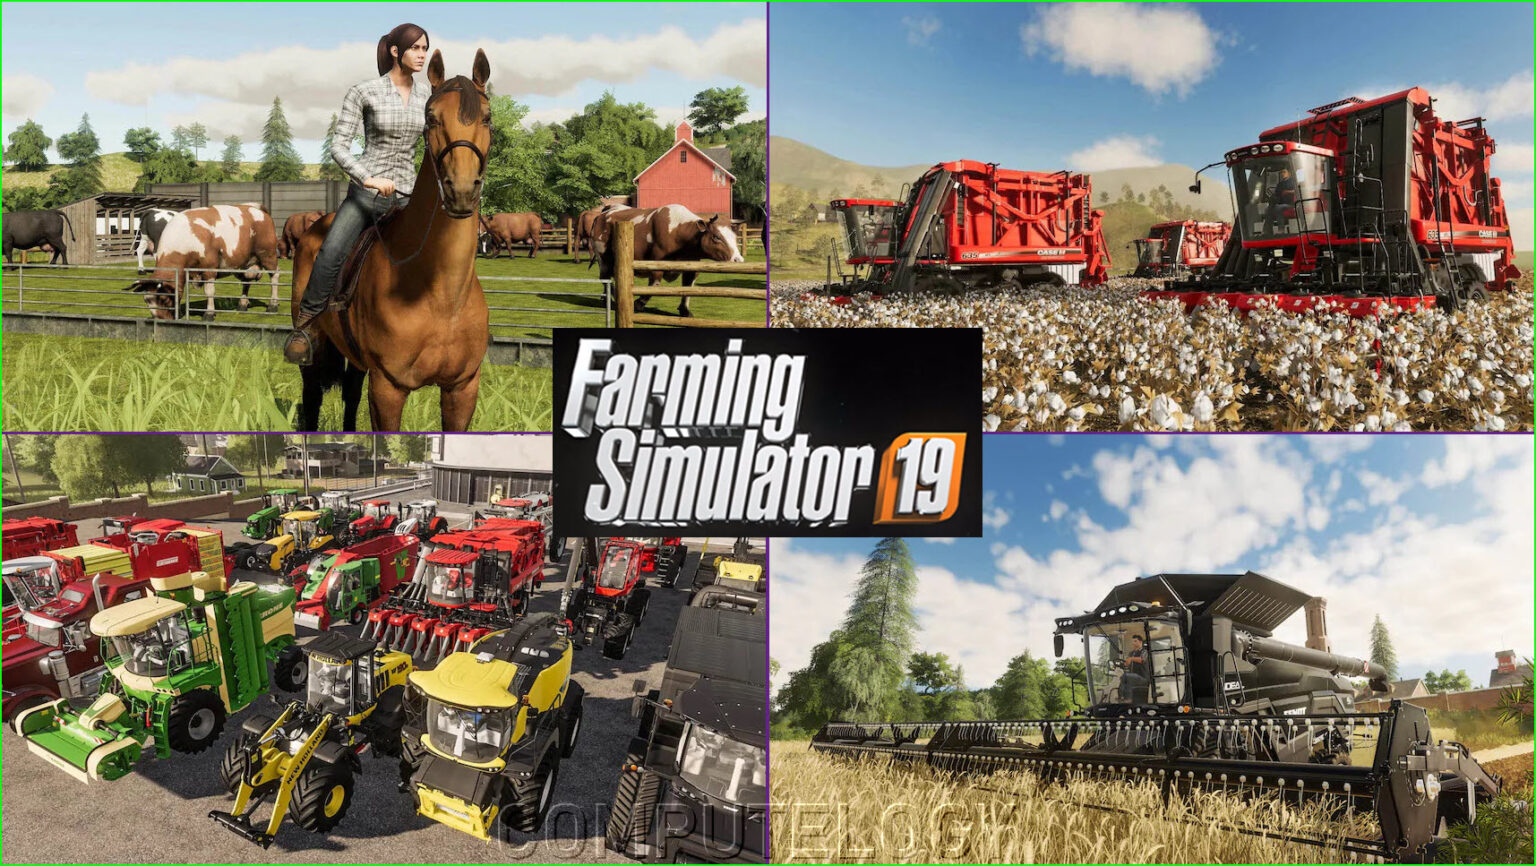 Download Farming Simulator 19 For Free Right Now And Save €25 Computelogy 1162